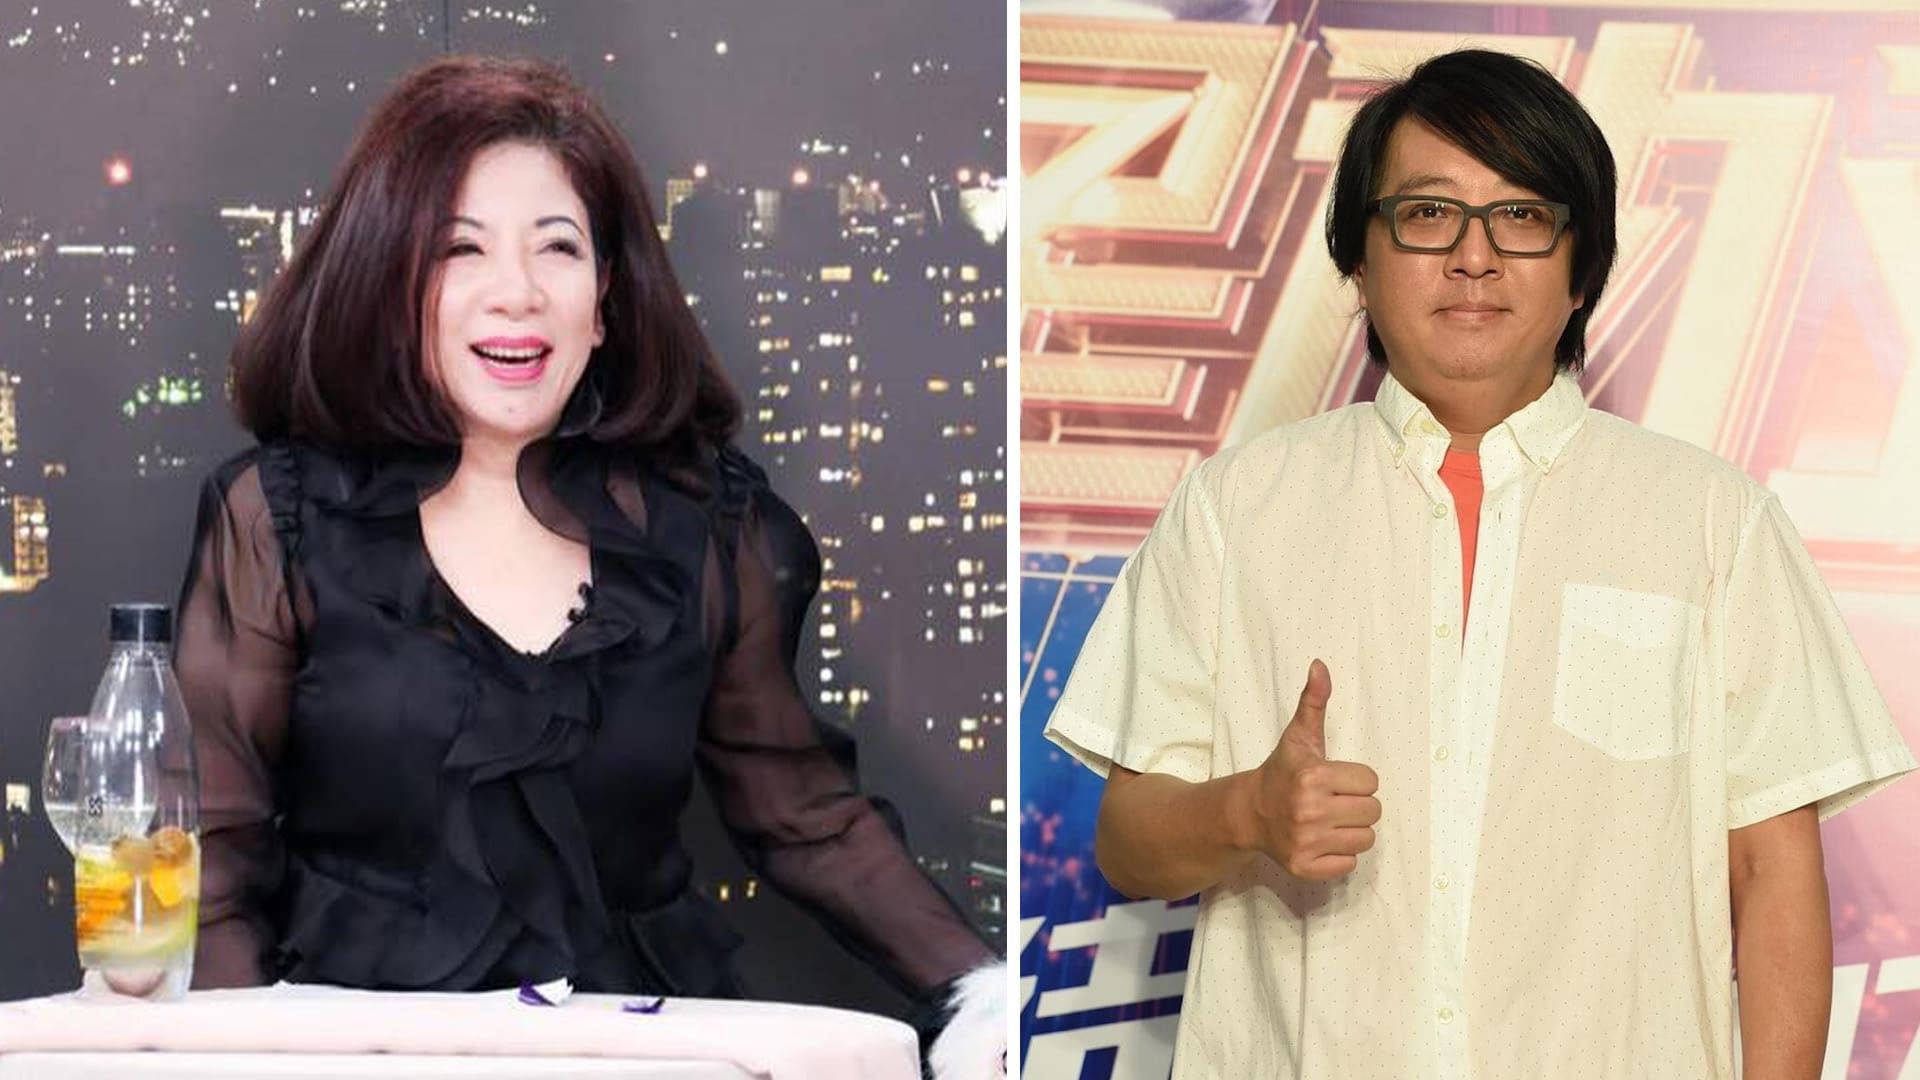 Taiwan Commentator Apologises For Wrongly Writing That One Million Star Judge Yuan Weiren “Has Gone”, Says She Took Sleeping Pills And Was “Out Of It”